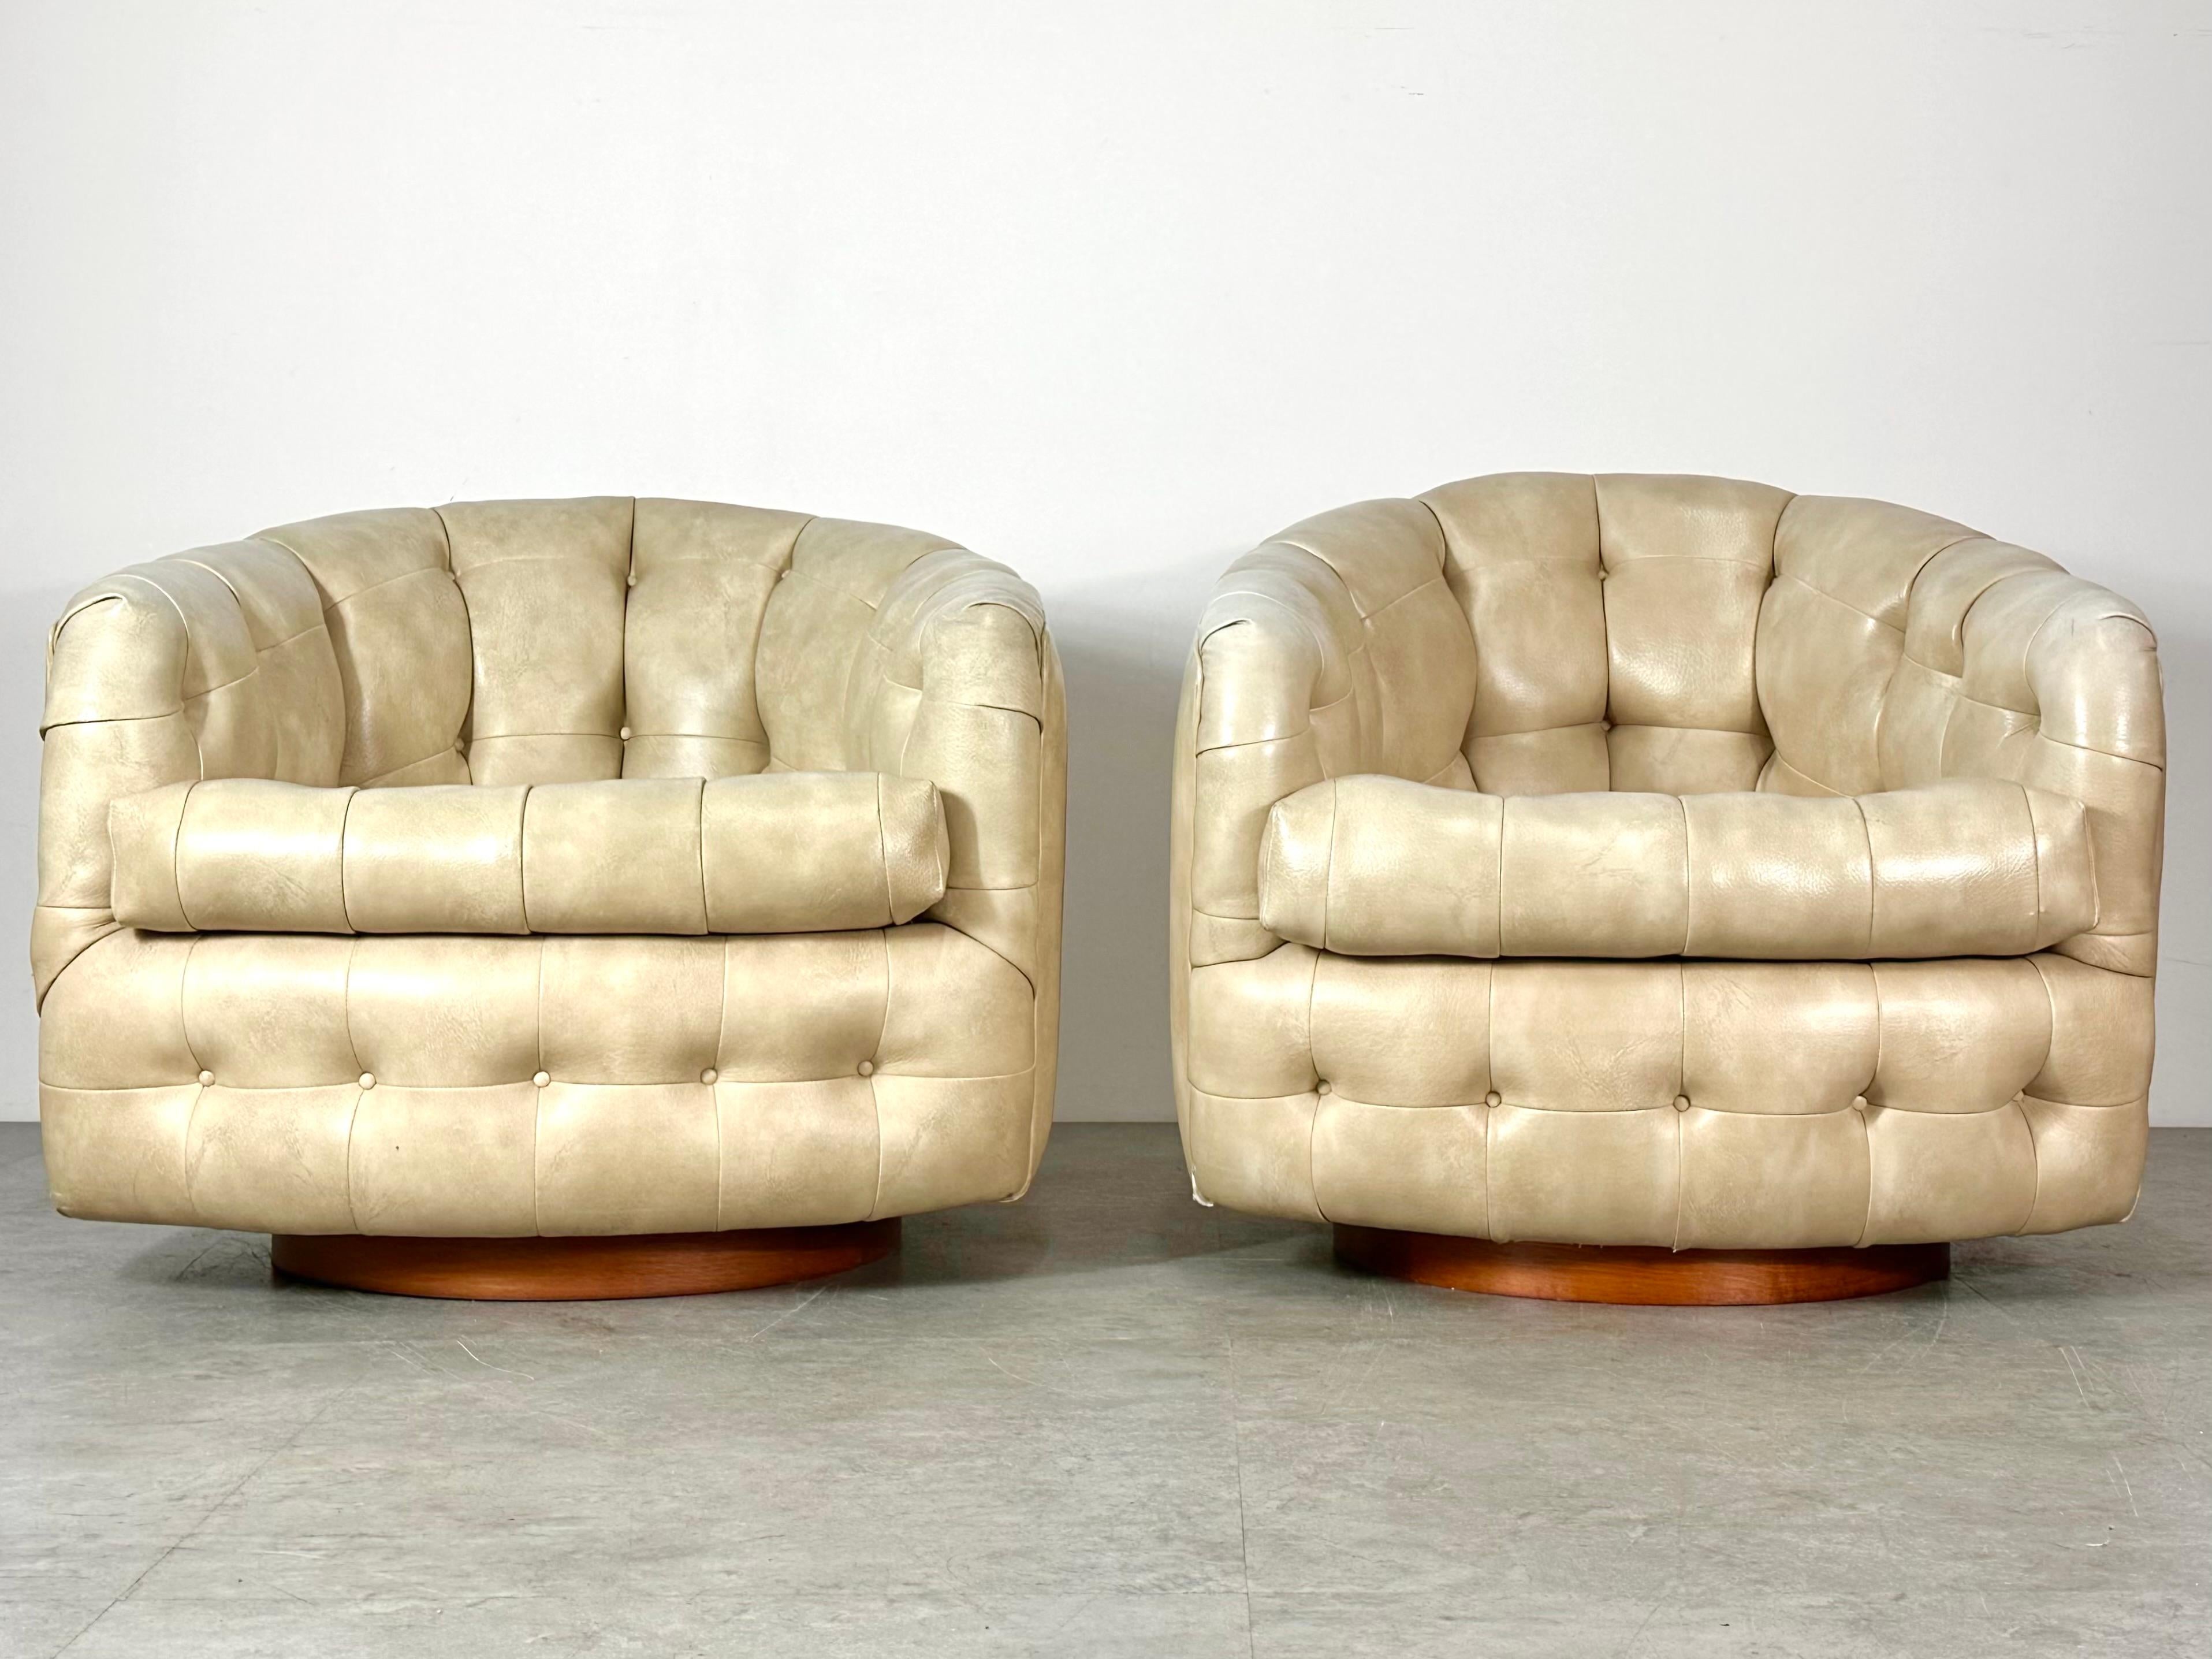 A pair of tufted swivel rocking lounge chairs designed by Milo Baughman for Thayer Coggin
Dated 1967
Barrel design in original tufted vinyl on round walnut plinth bases

Original labels intact

30